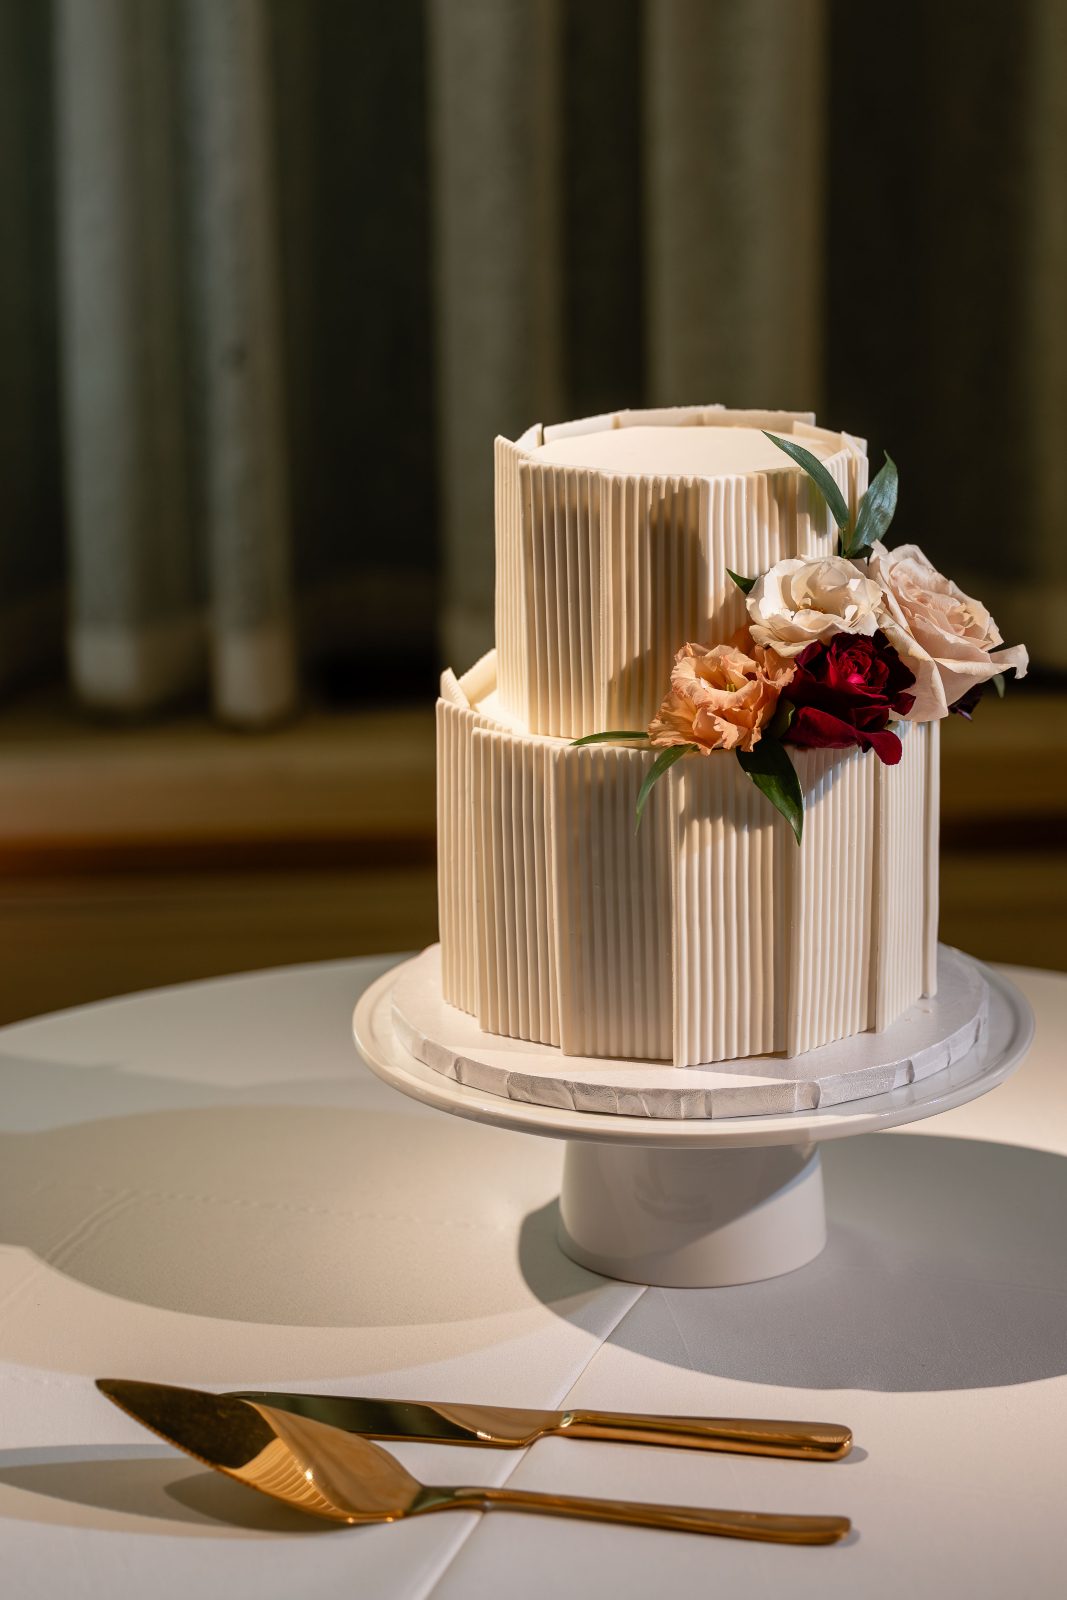 A simple two tier cake with verticle striped texture and a cluster of roses, lisianthus and greenery tucks